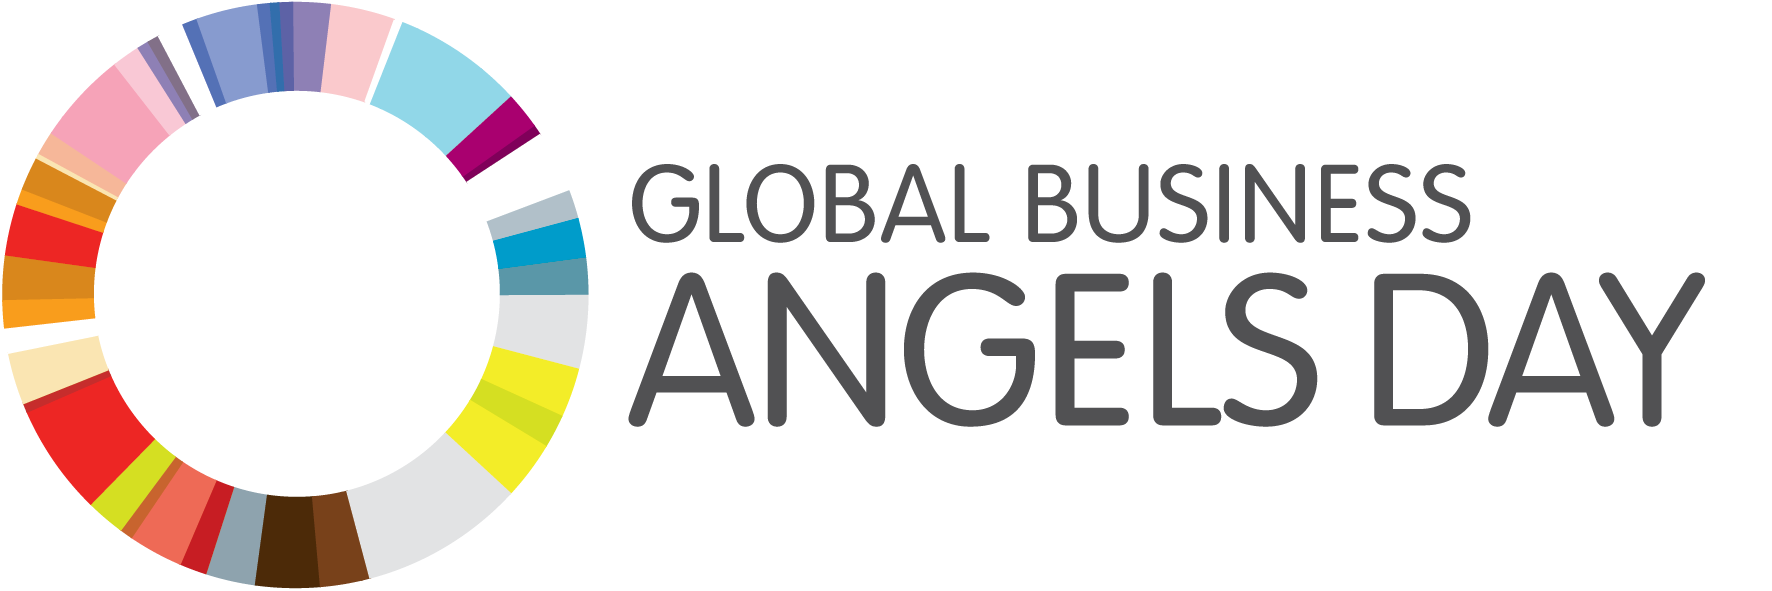 GLOBAL-BUSINESS-ANGELS-DAY